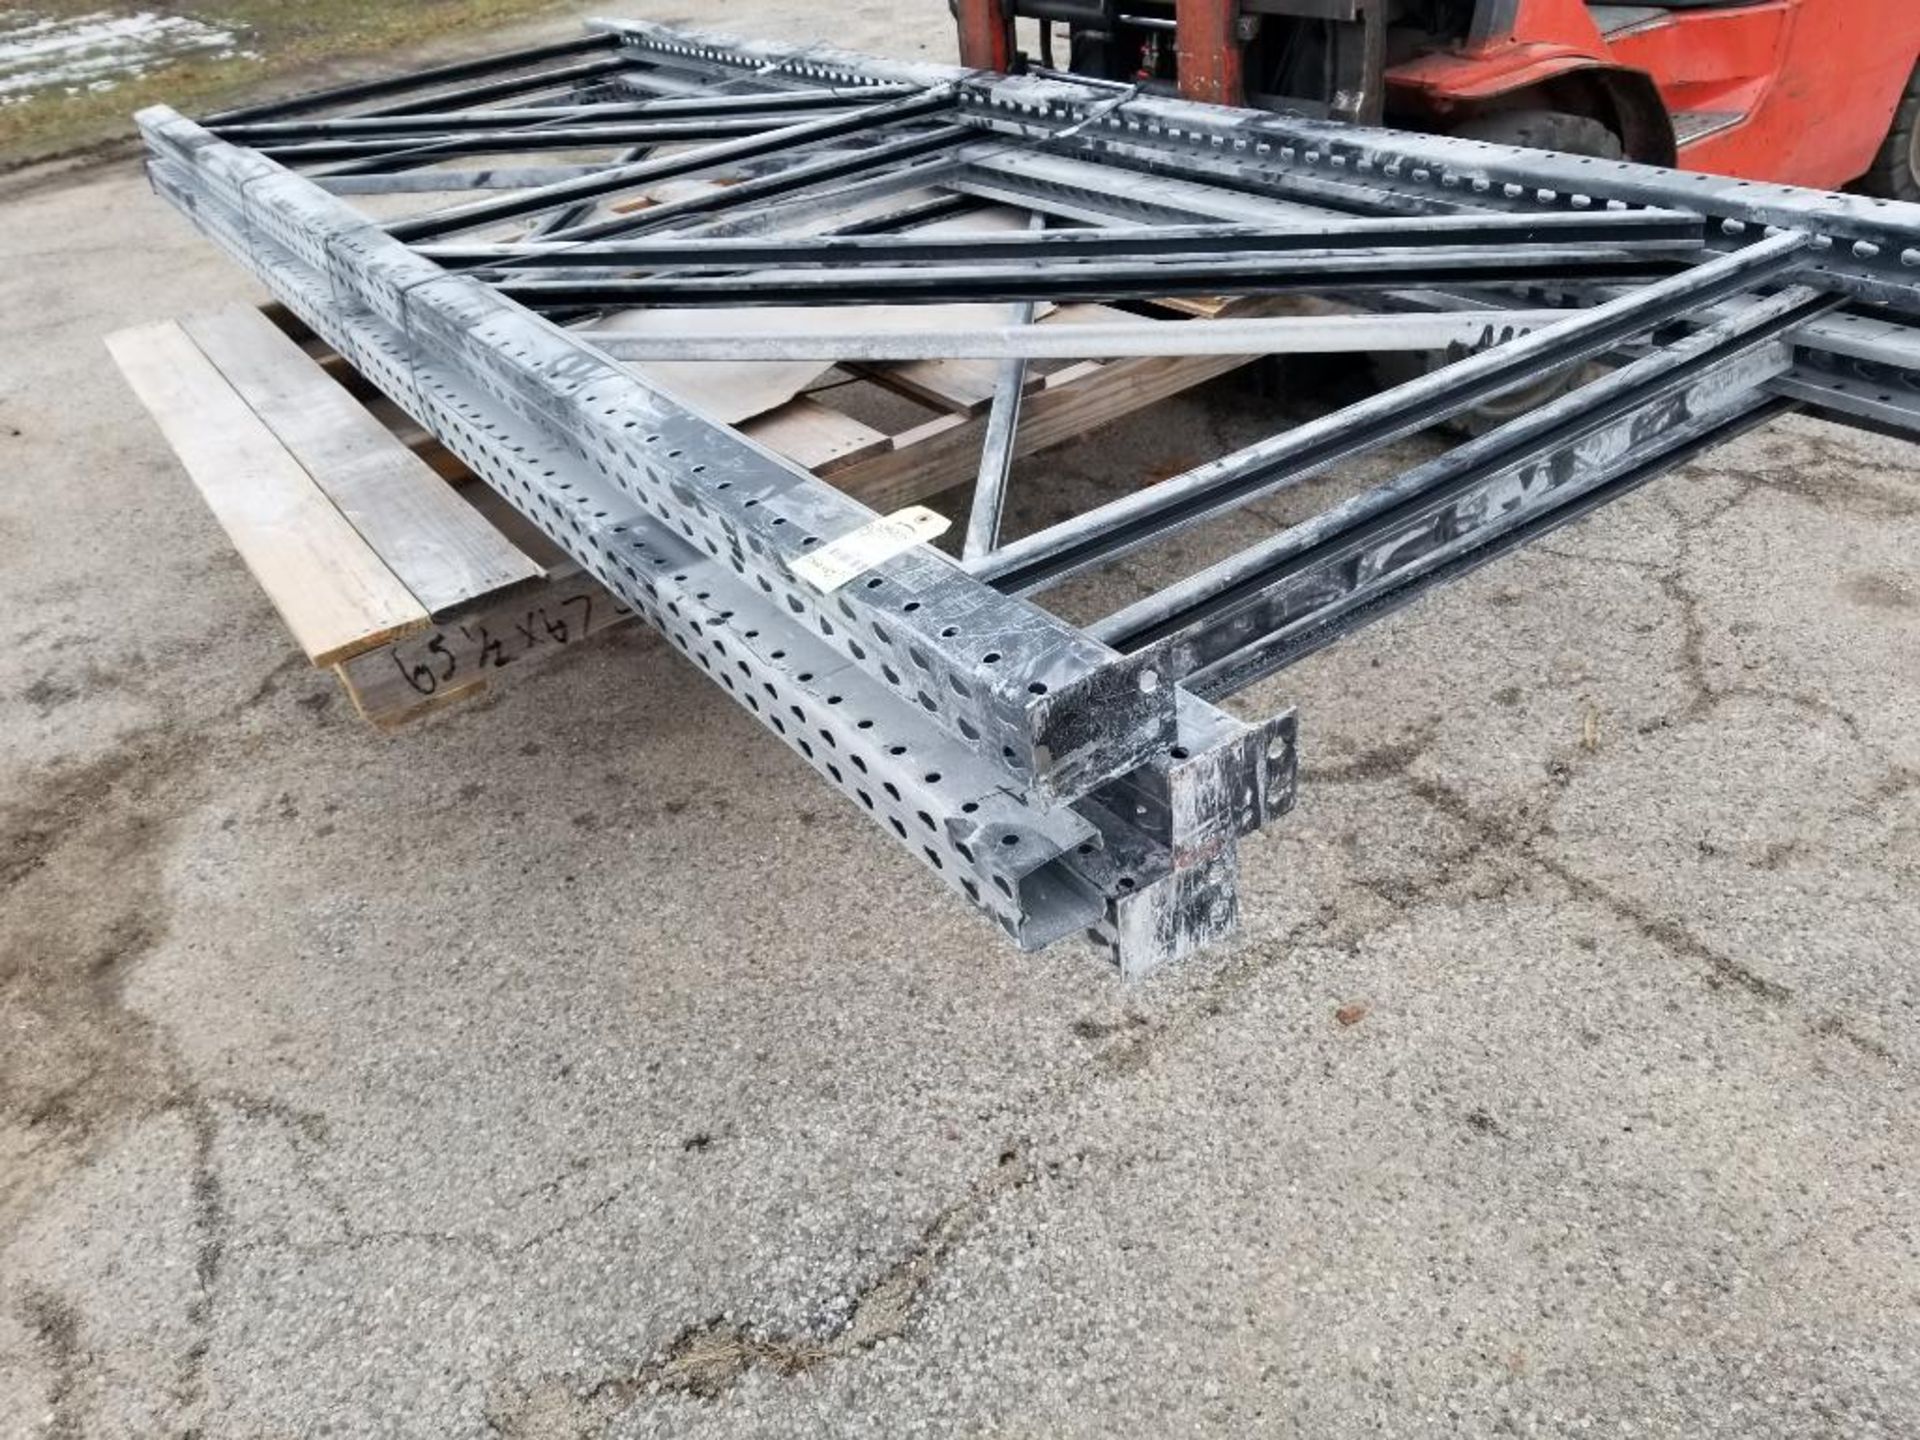 Qty 4 - Pallet racking uprights.Teardrop style. 144in tall x 48in wide.